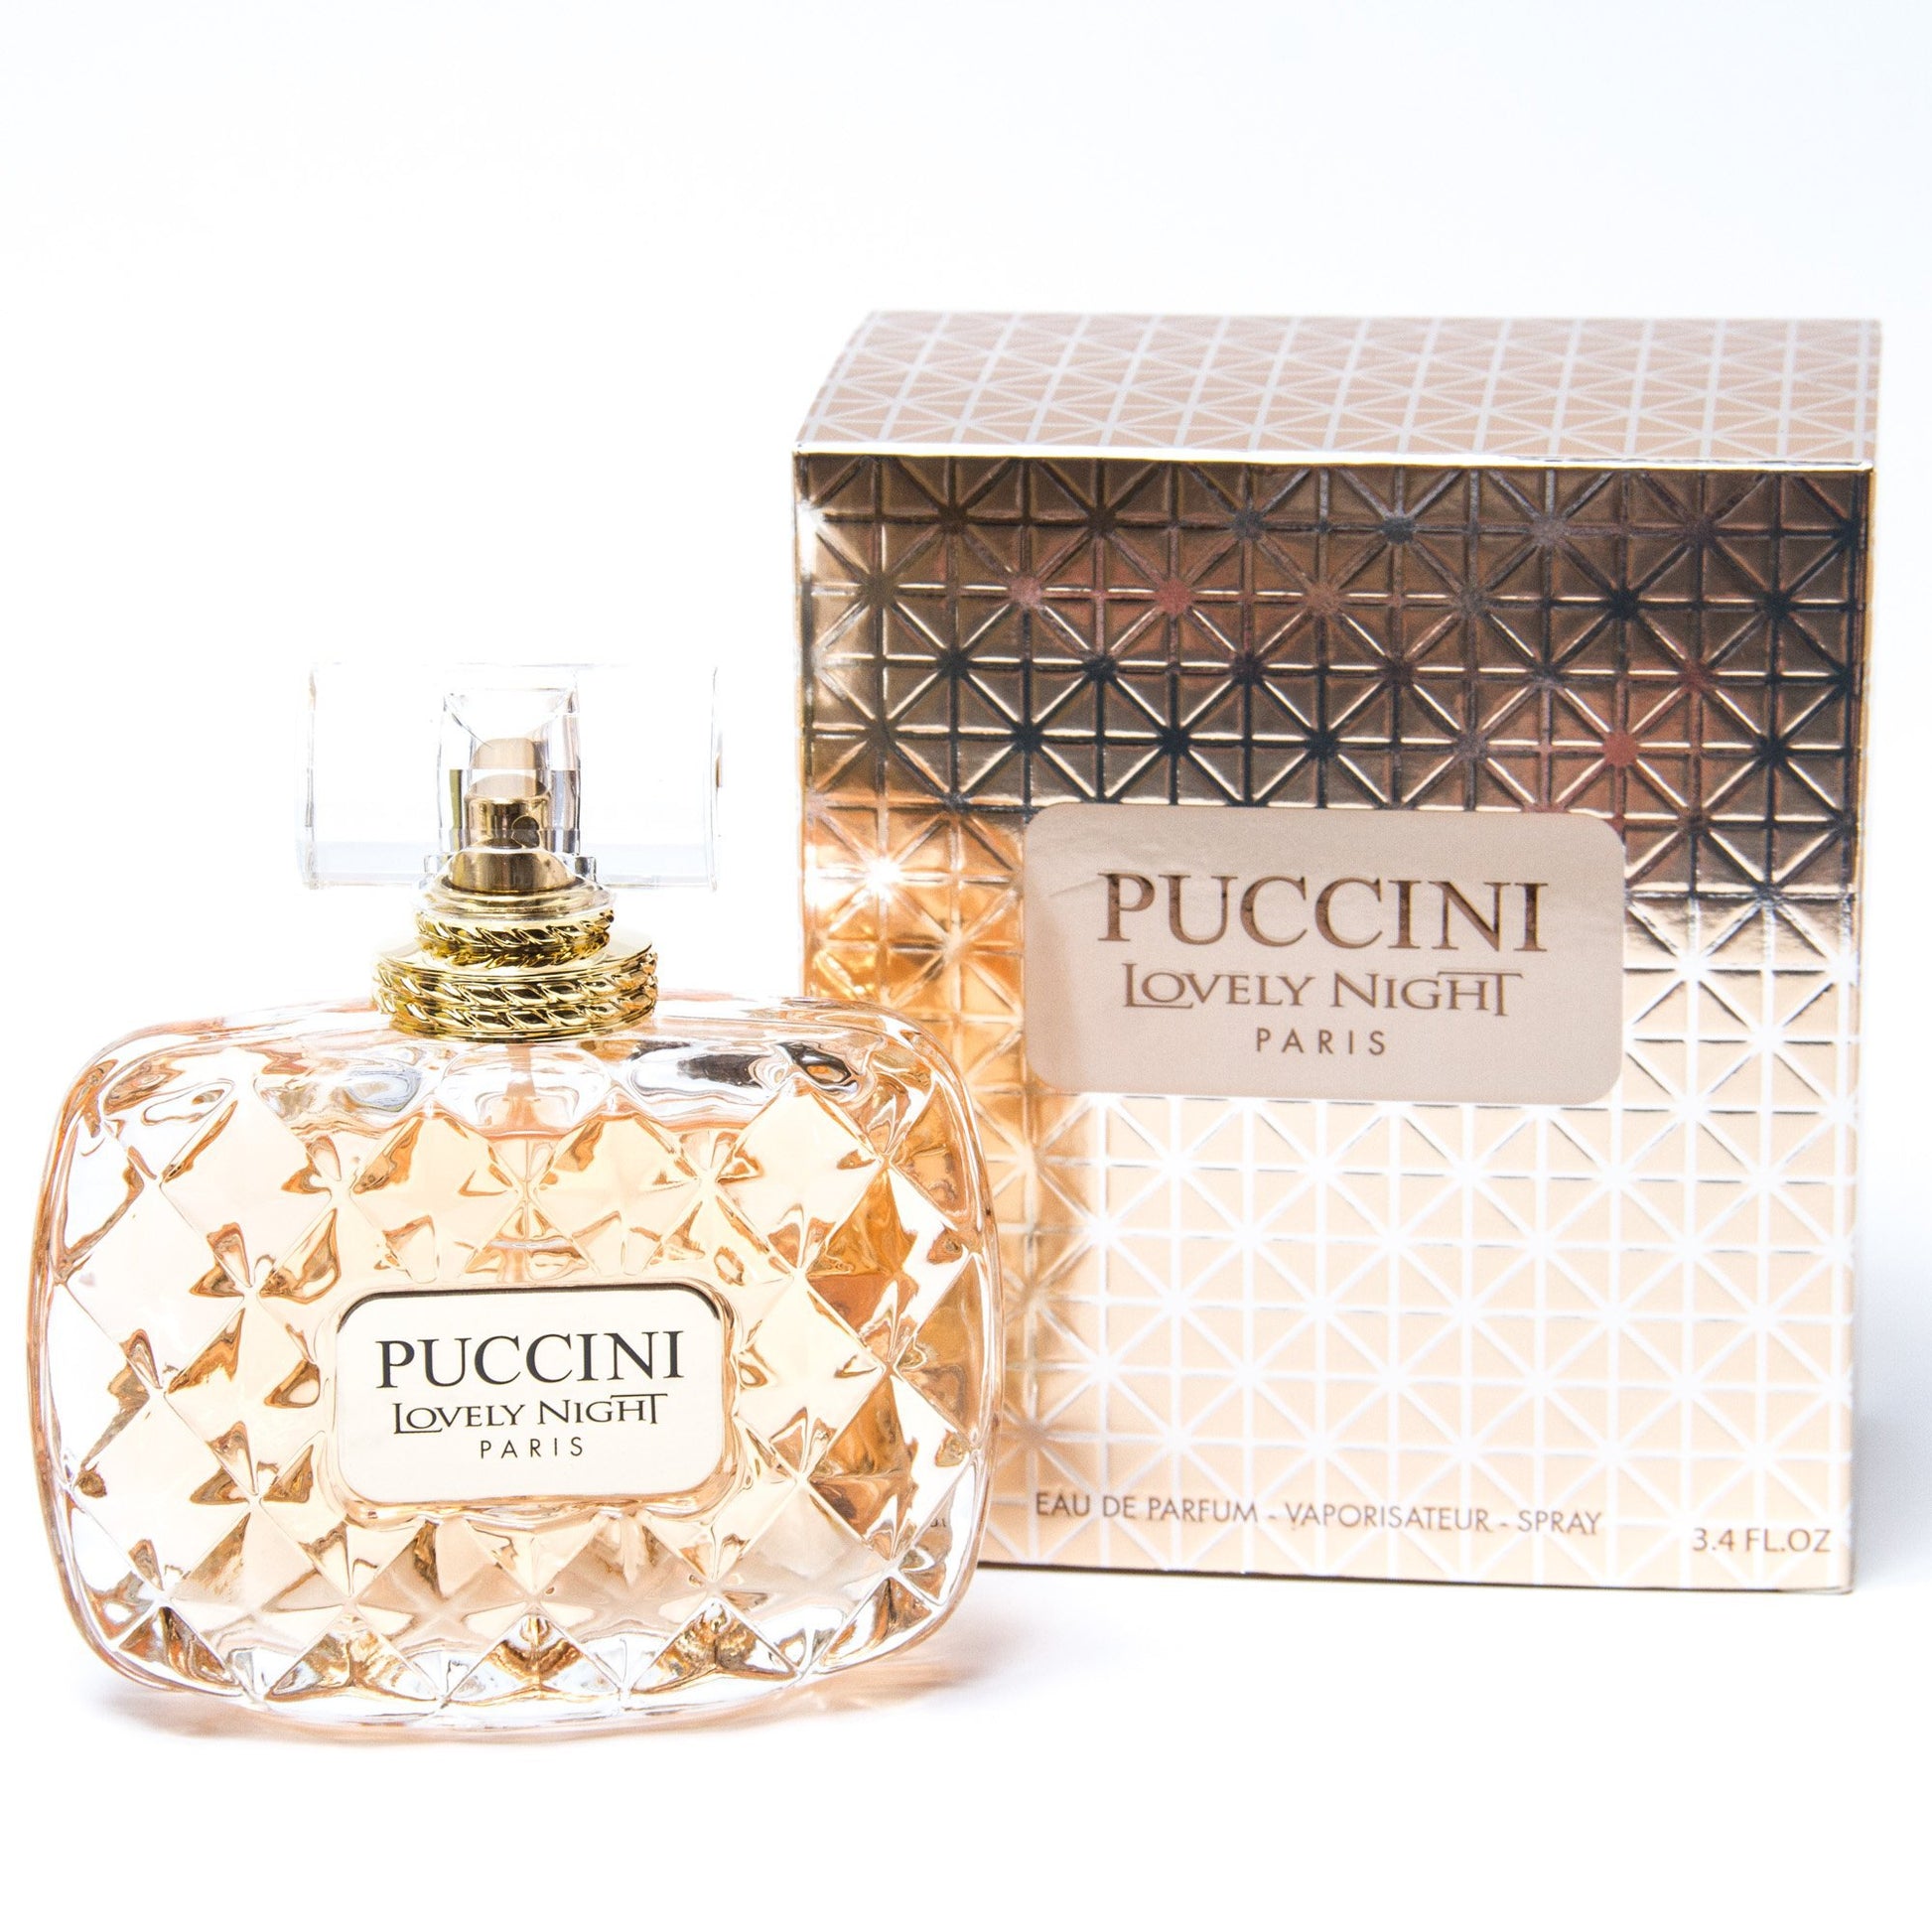 Puccini Lovely Night Eau de Toilette Spray for Women, Product image 1